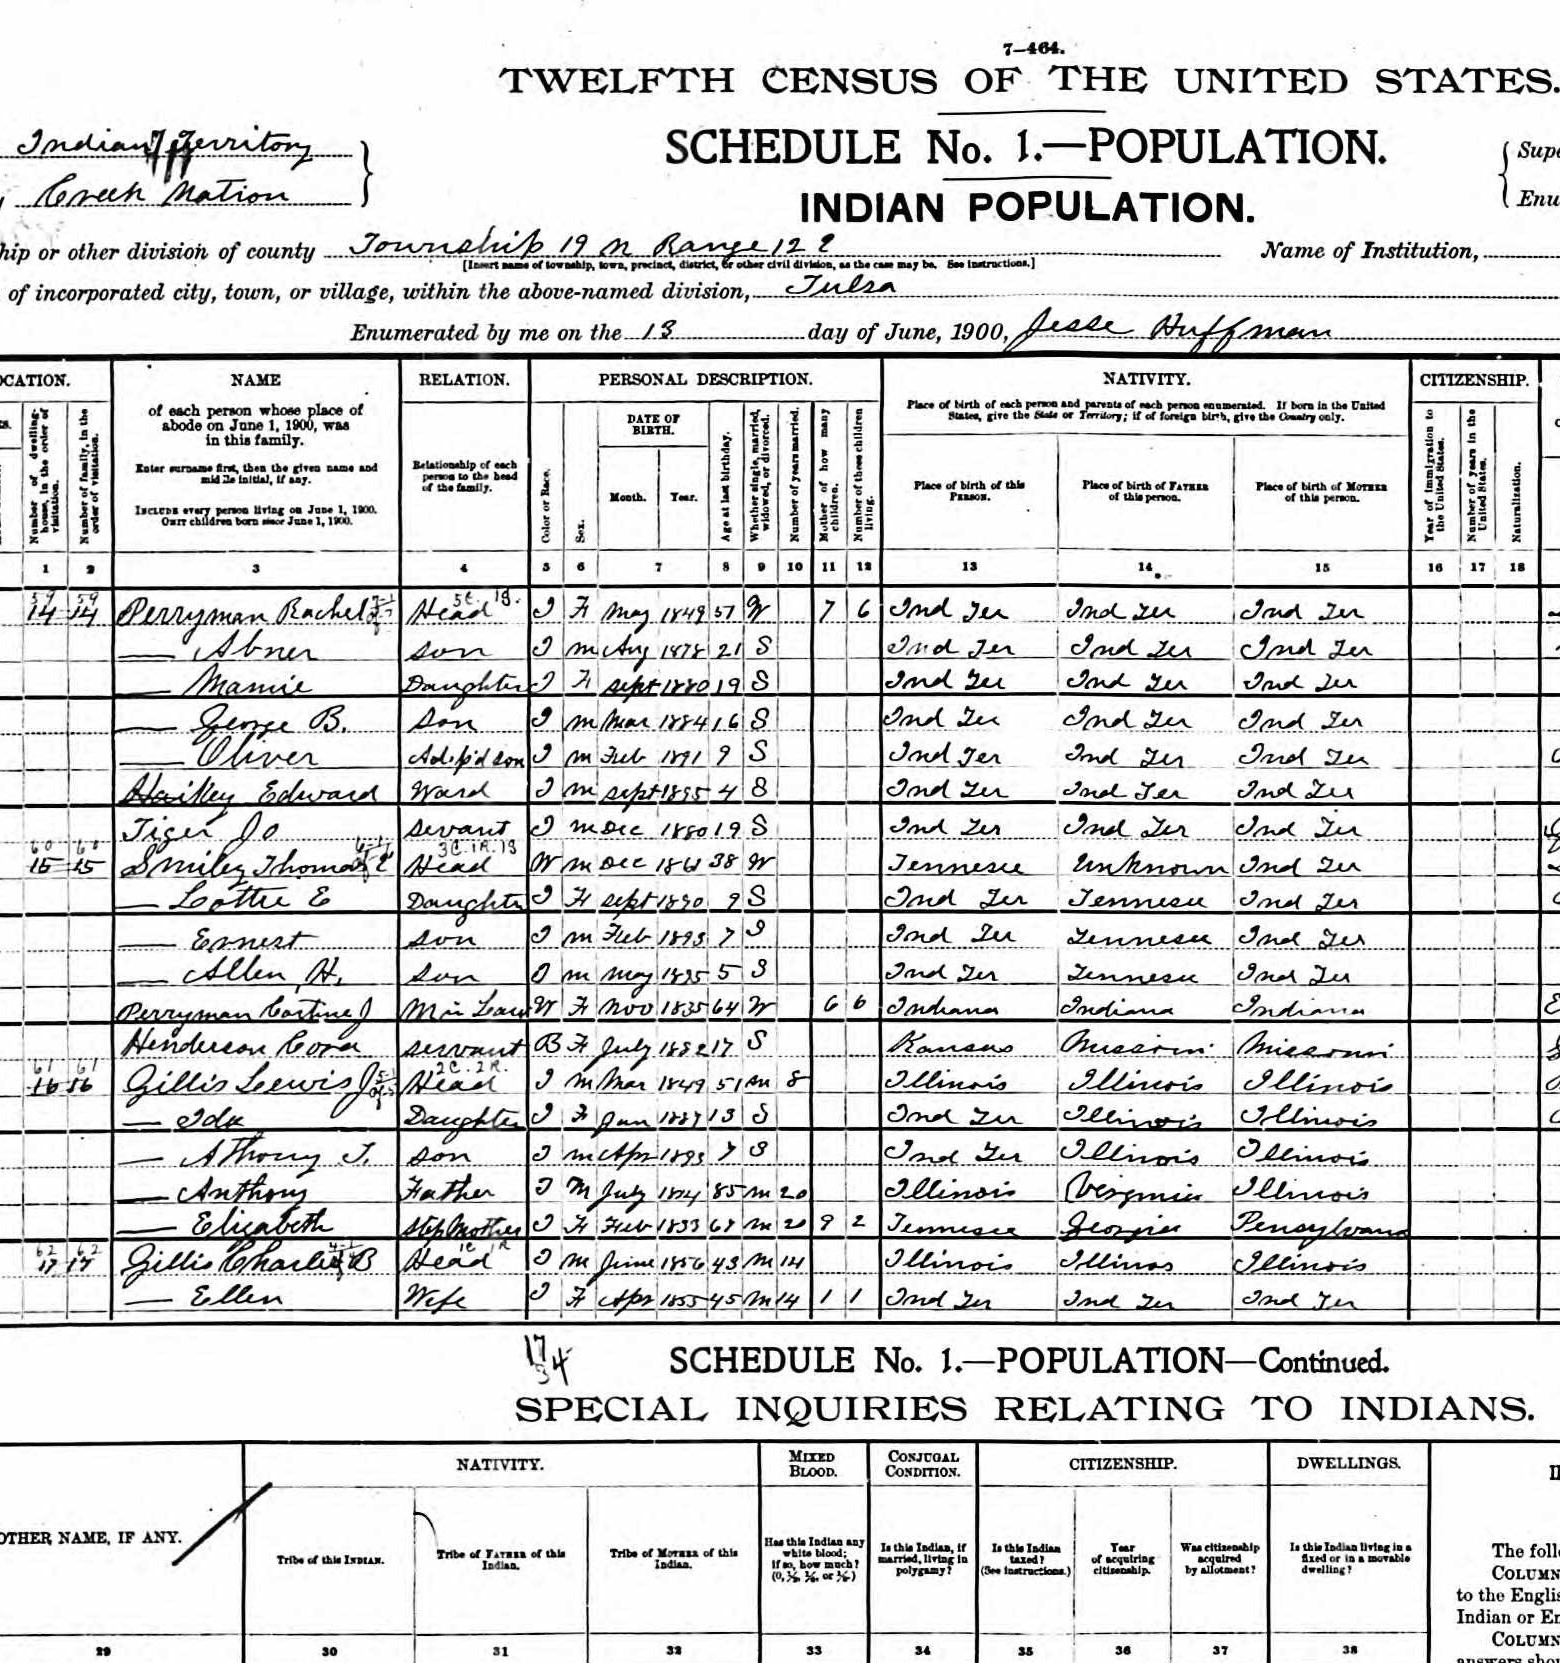 A copy of the 1900 census for Indian Territory